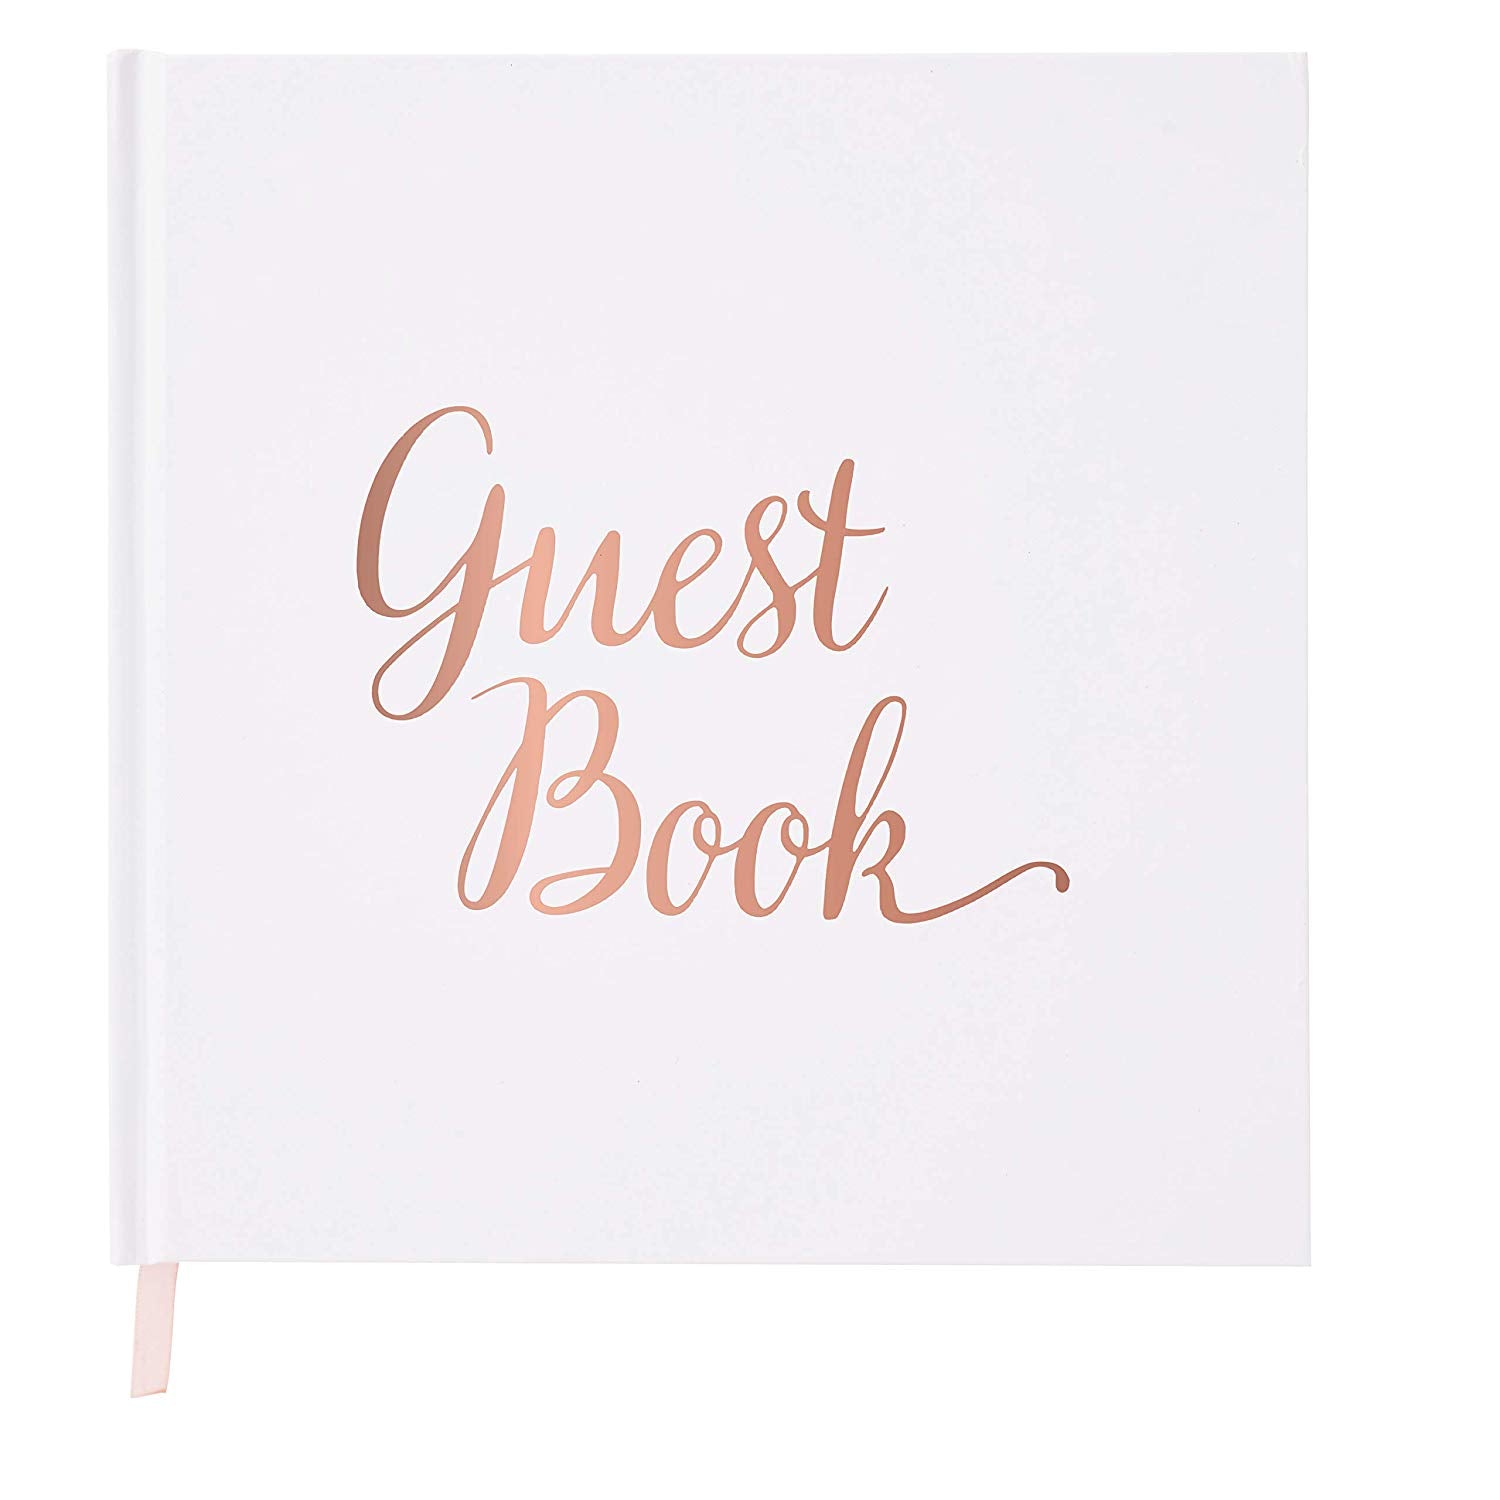 Wedding Guest Book Paper Choices - Paper Bound Love